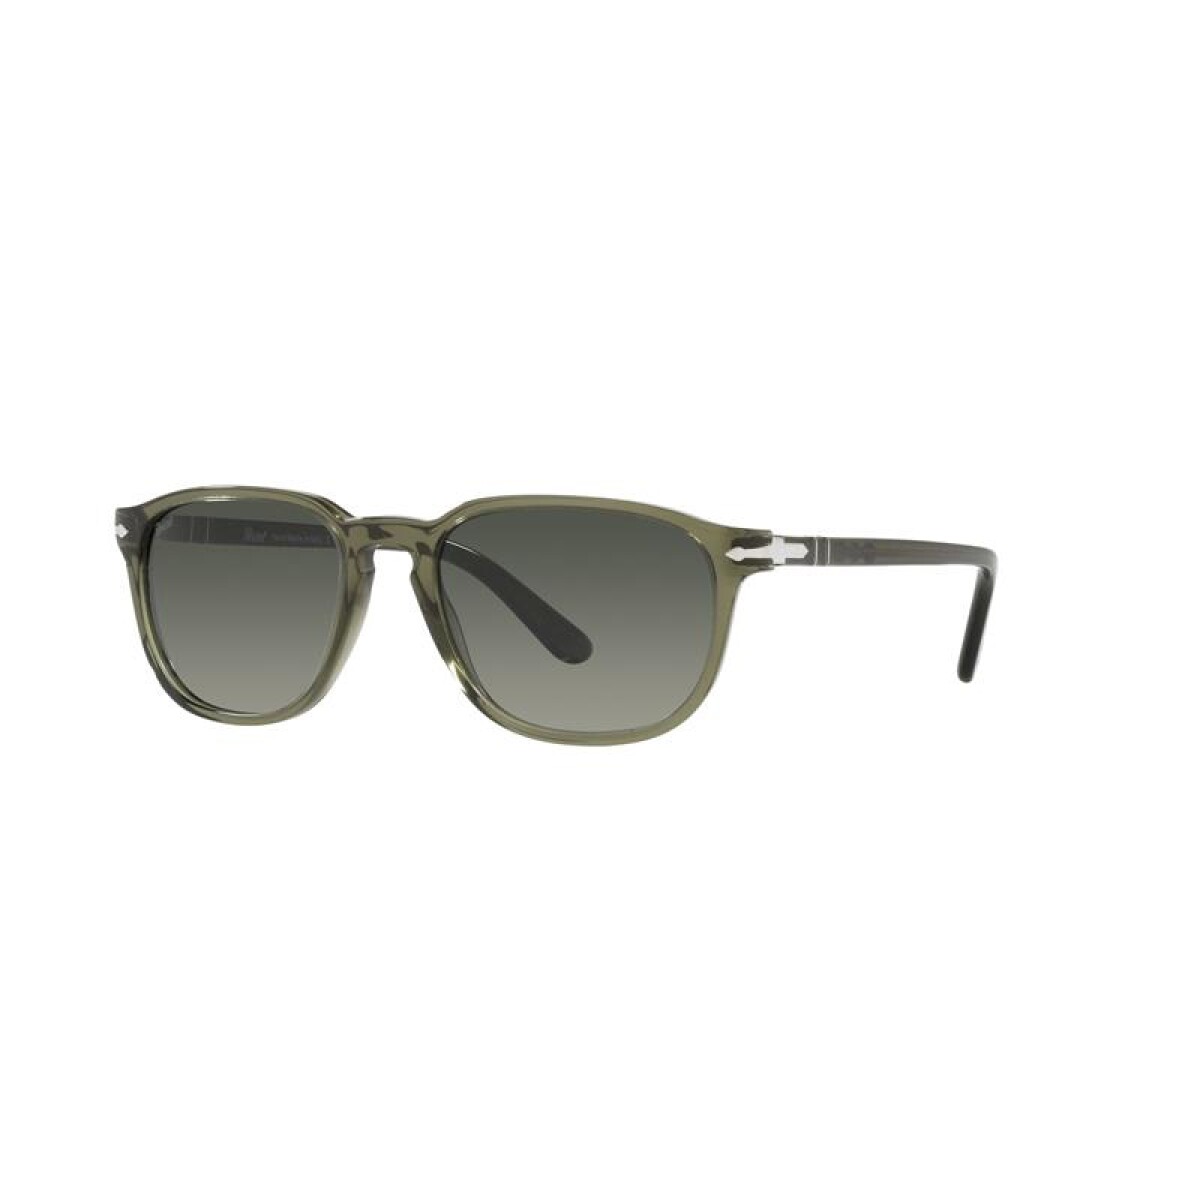 Persol 3019-s - 1142/71 